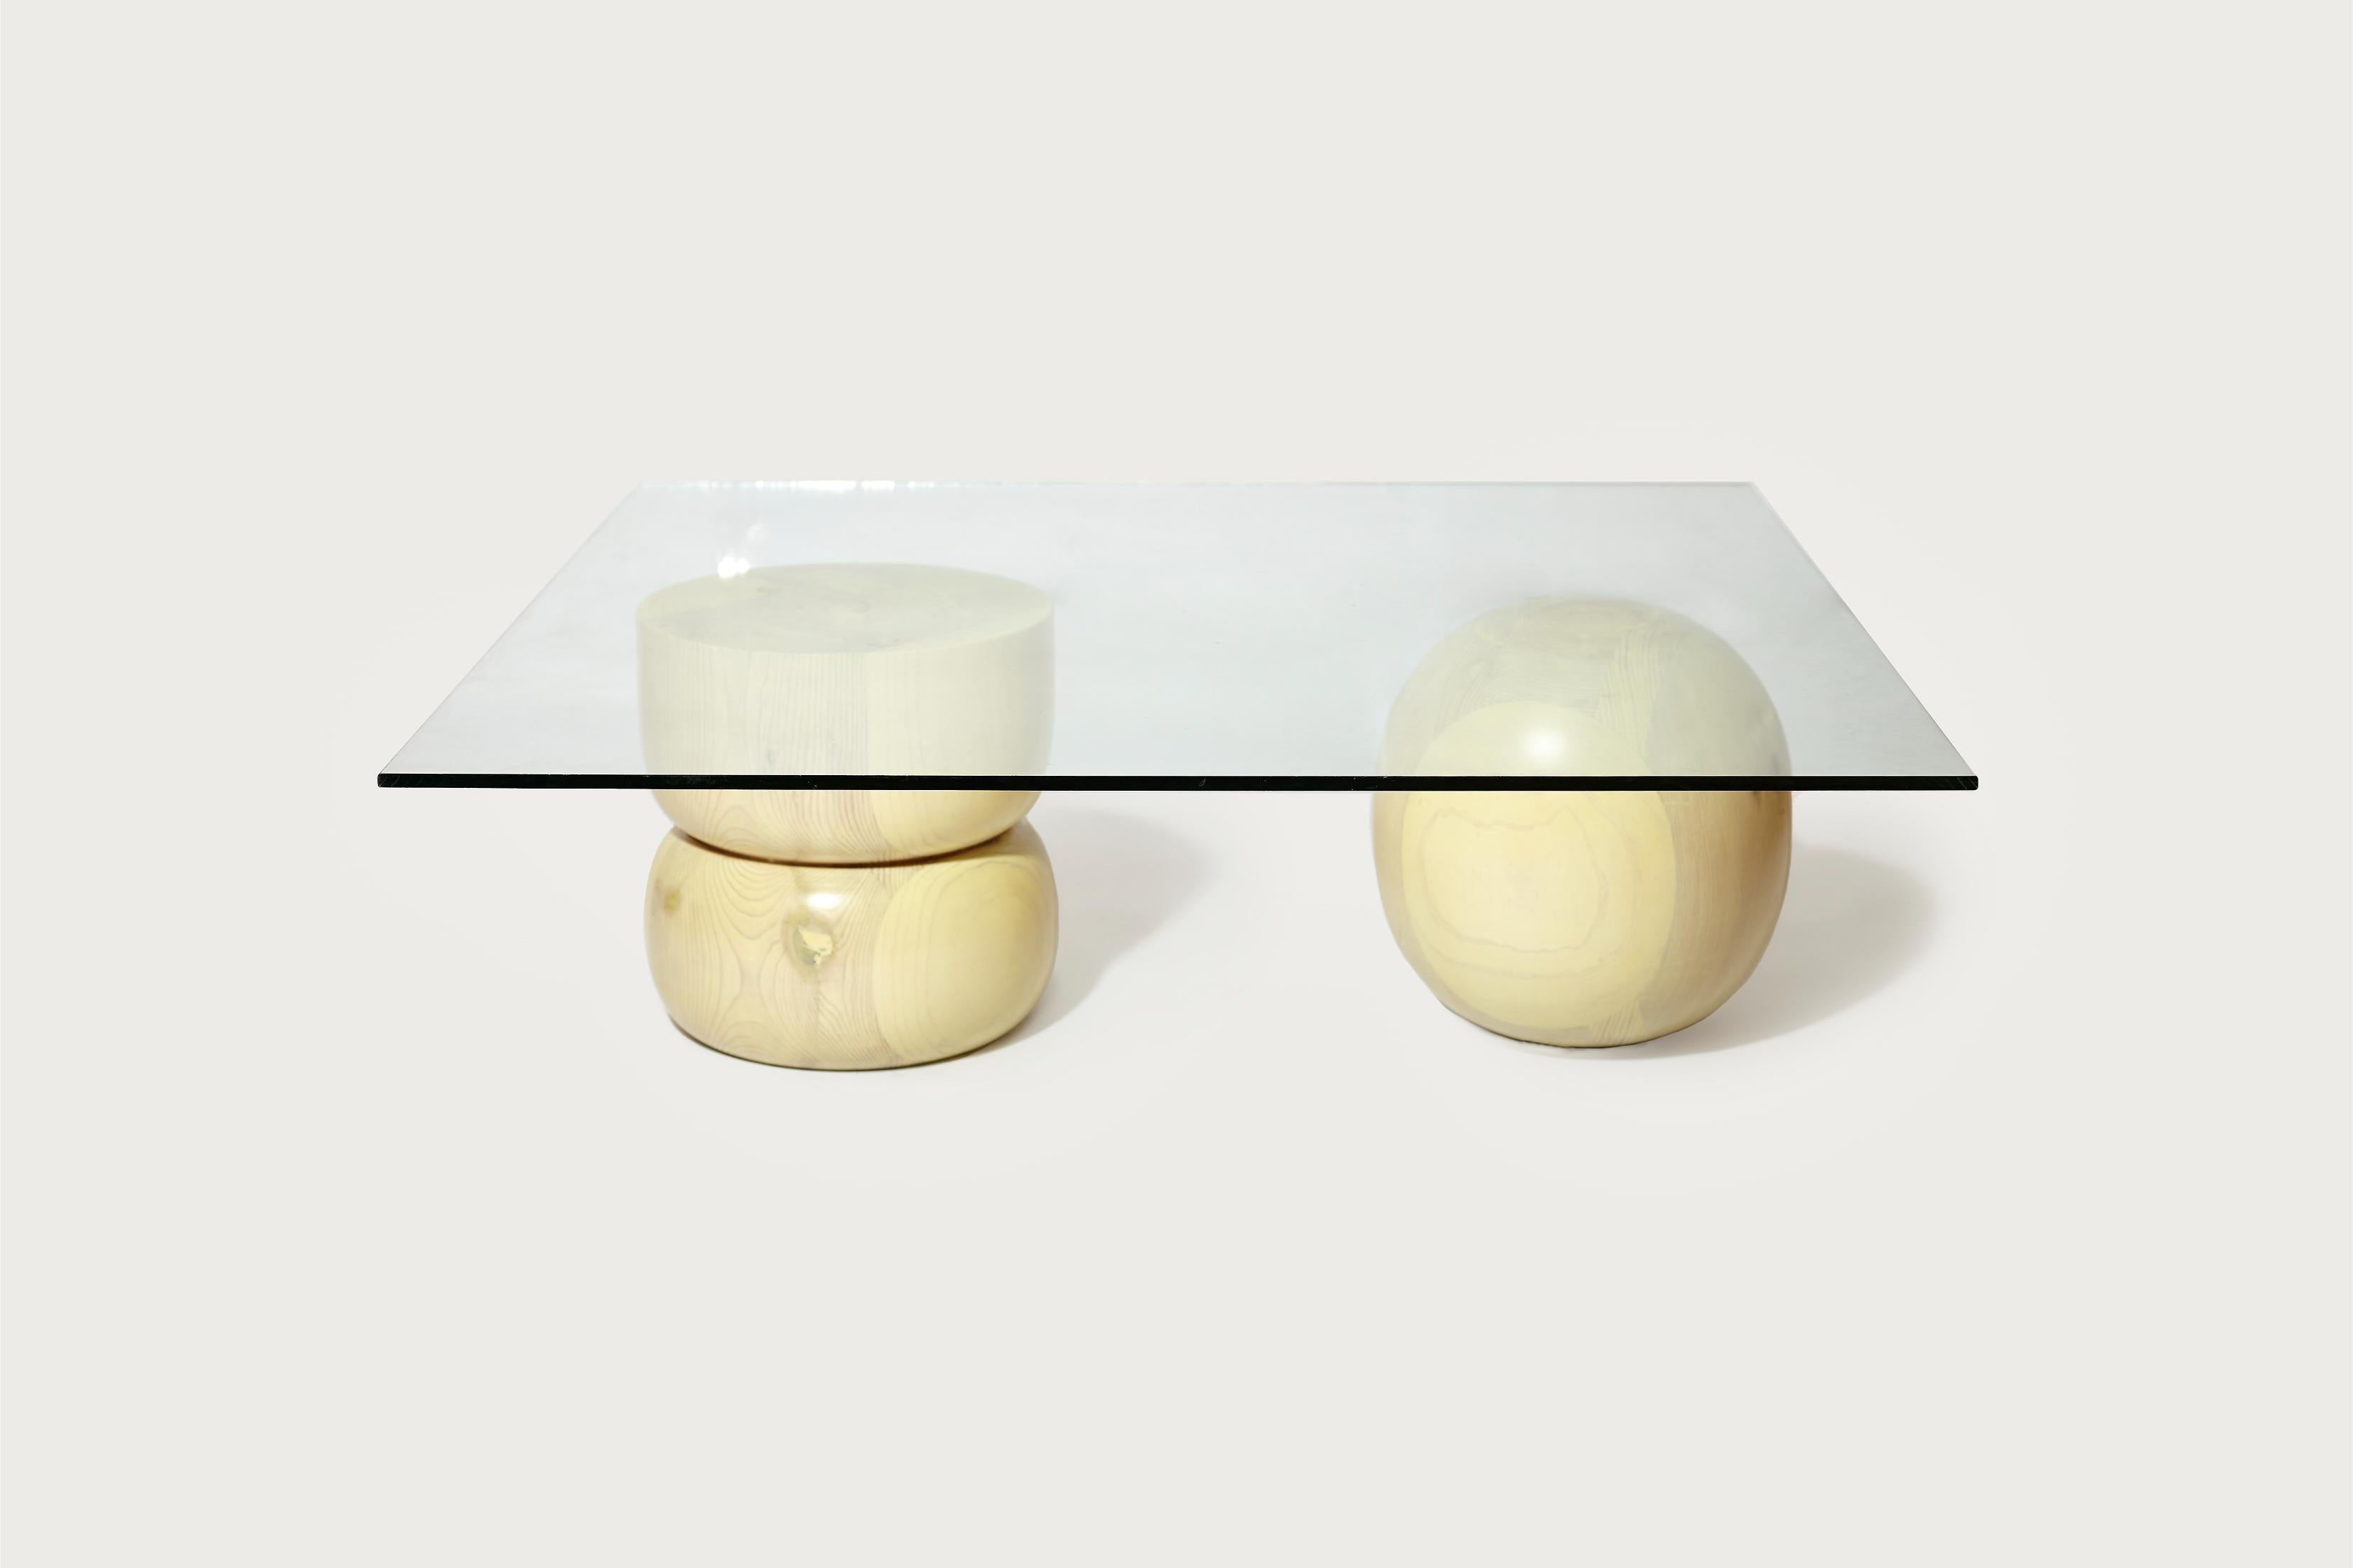 Sisyphean coffee table by Panorammma
Materials: wood, tempered glass, silicone holdings.
Dimensions: 32.6 x 100 x 100 cm

Panorammma is a furniture design atelier based in Mexico City that seeks to redefine our relation to functional objects